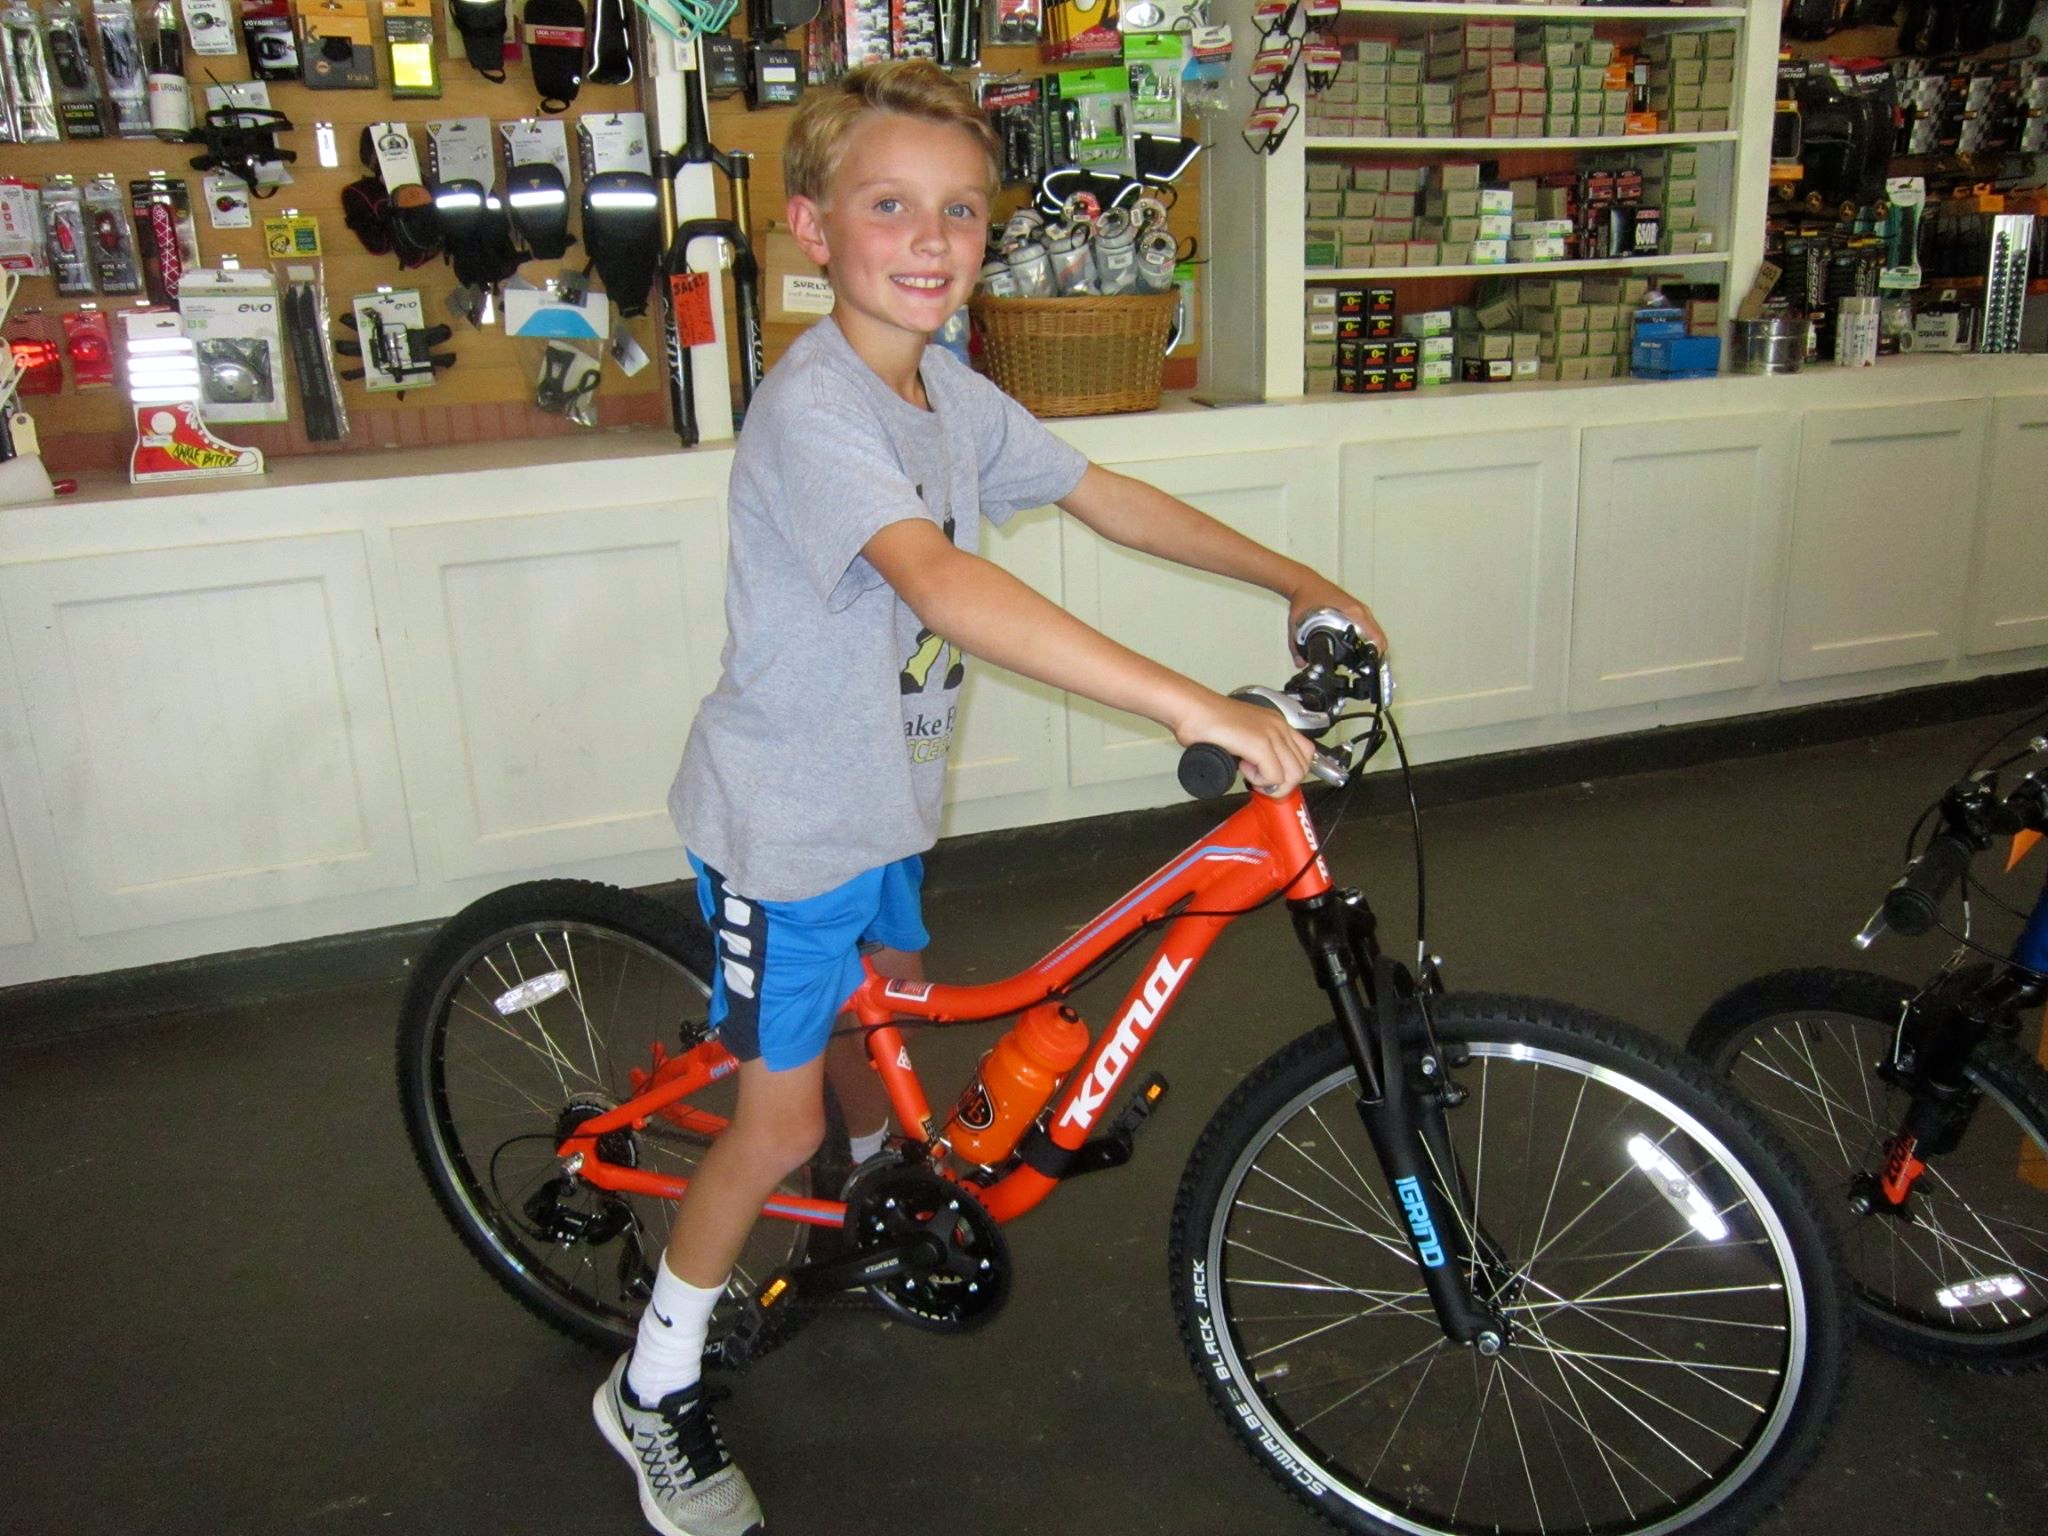 Finn on his new Kona Hula. He is ready for single track trails on his wonderful new Kona Bicycle. Looking Good!